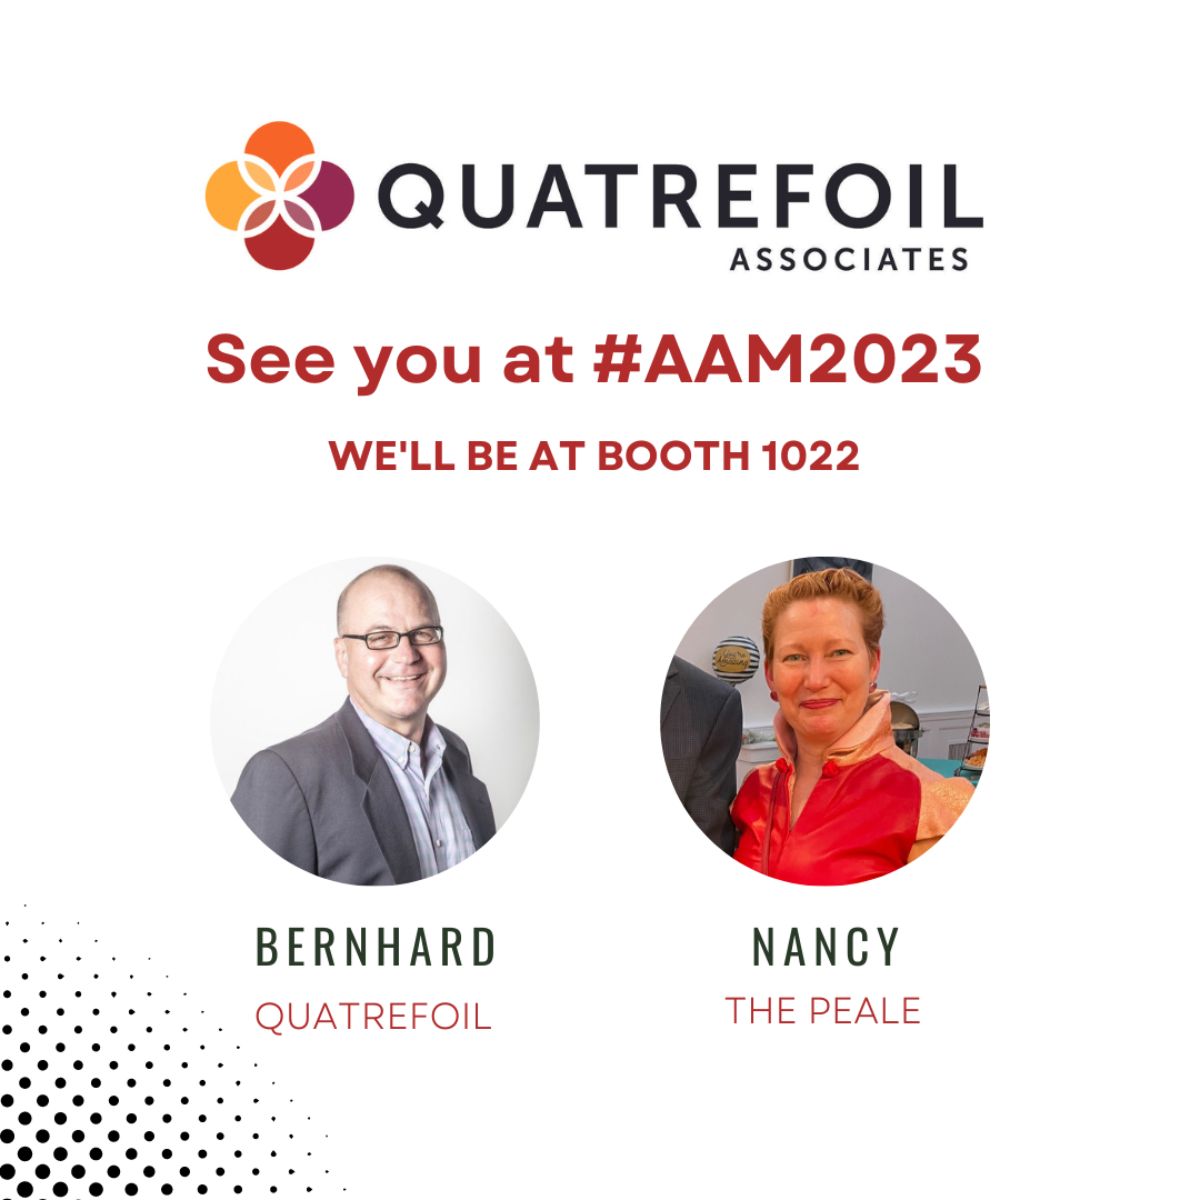 Quatrefoil Associates See You at #AAM2023. We'll be at booth 1022